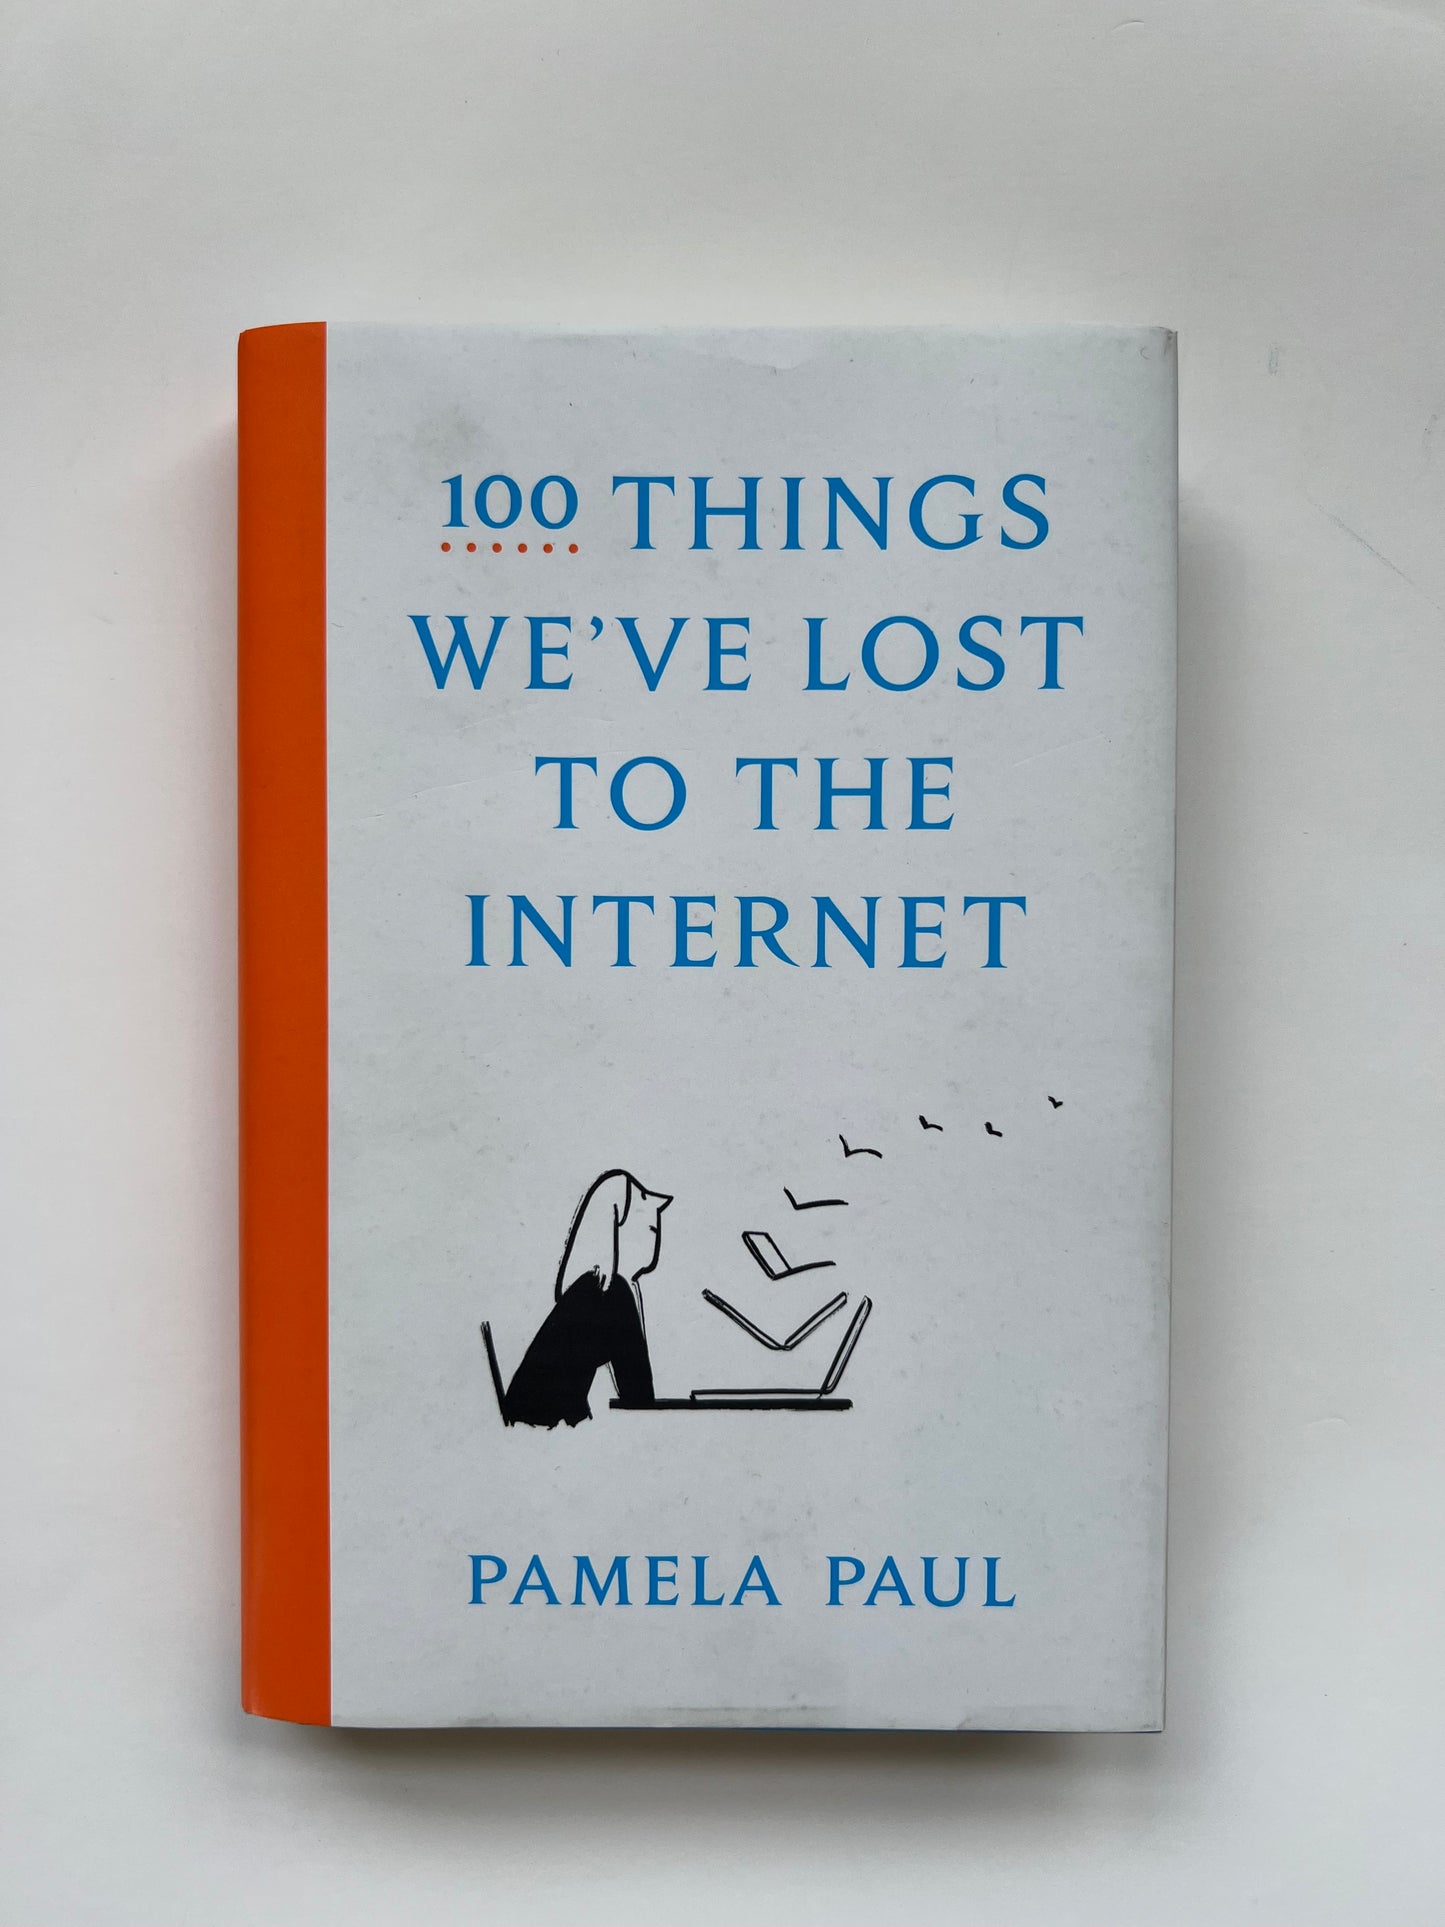 100 Things We've Lost to the Internet